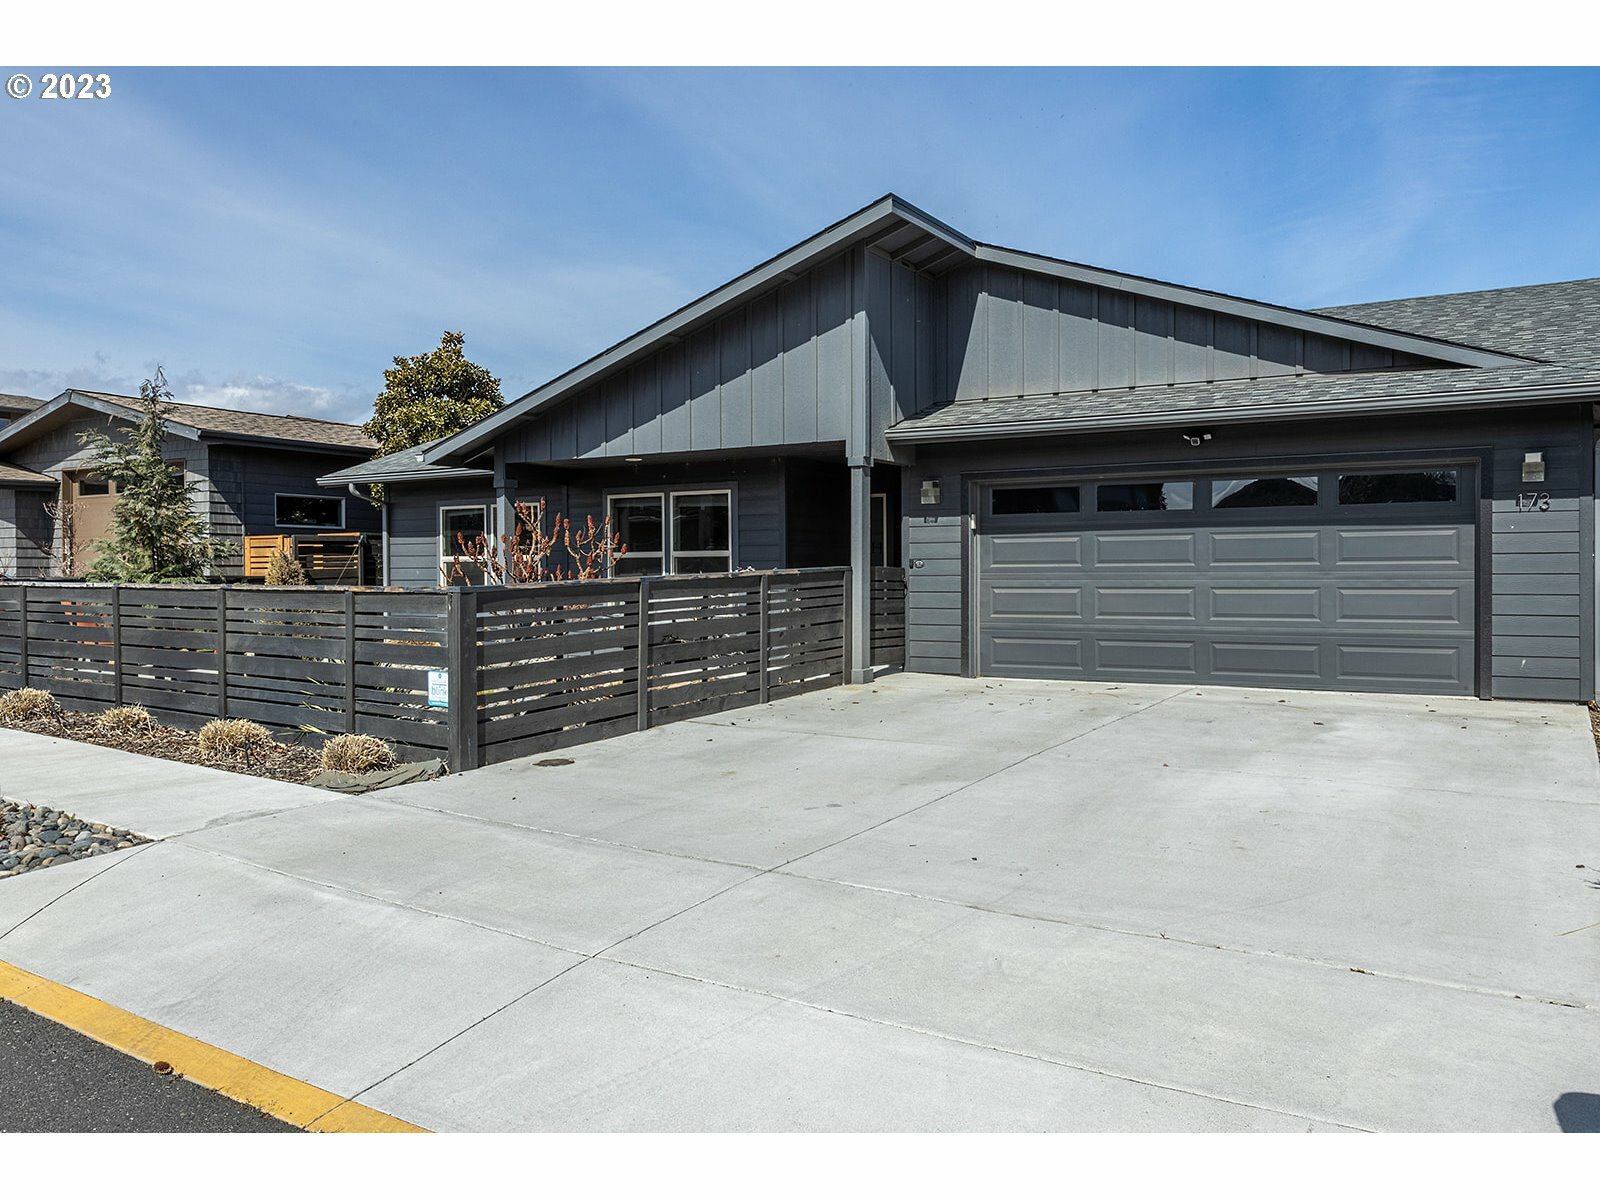 173 Blue Heron Ct  The Dalles OR 97058 photo